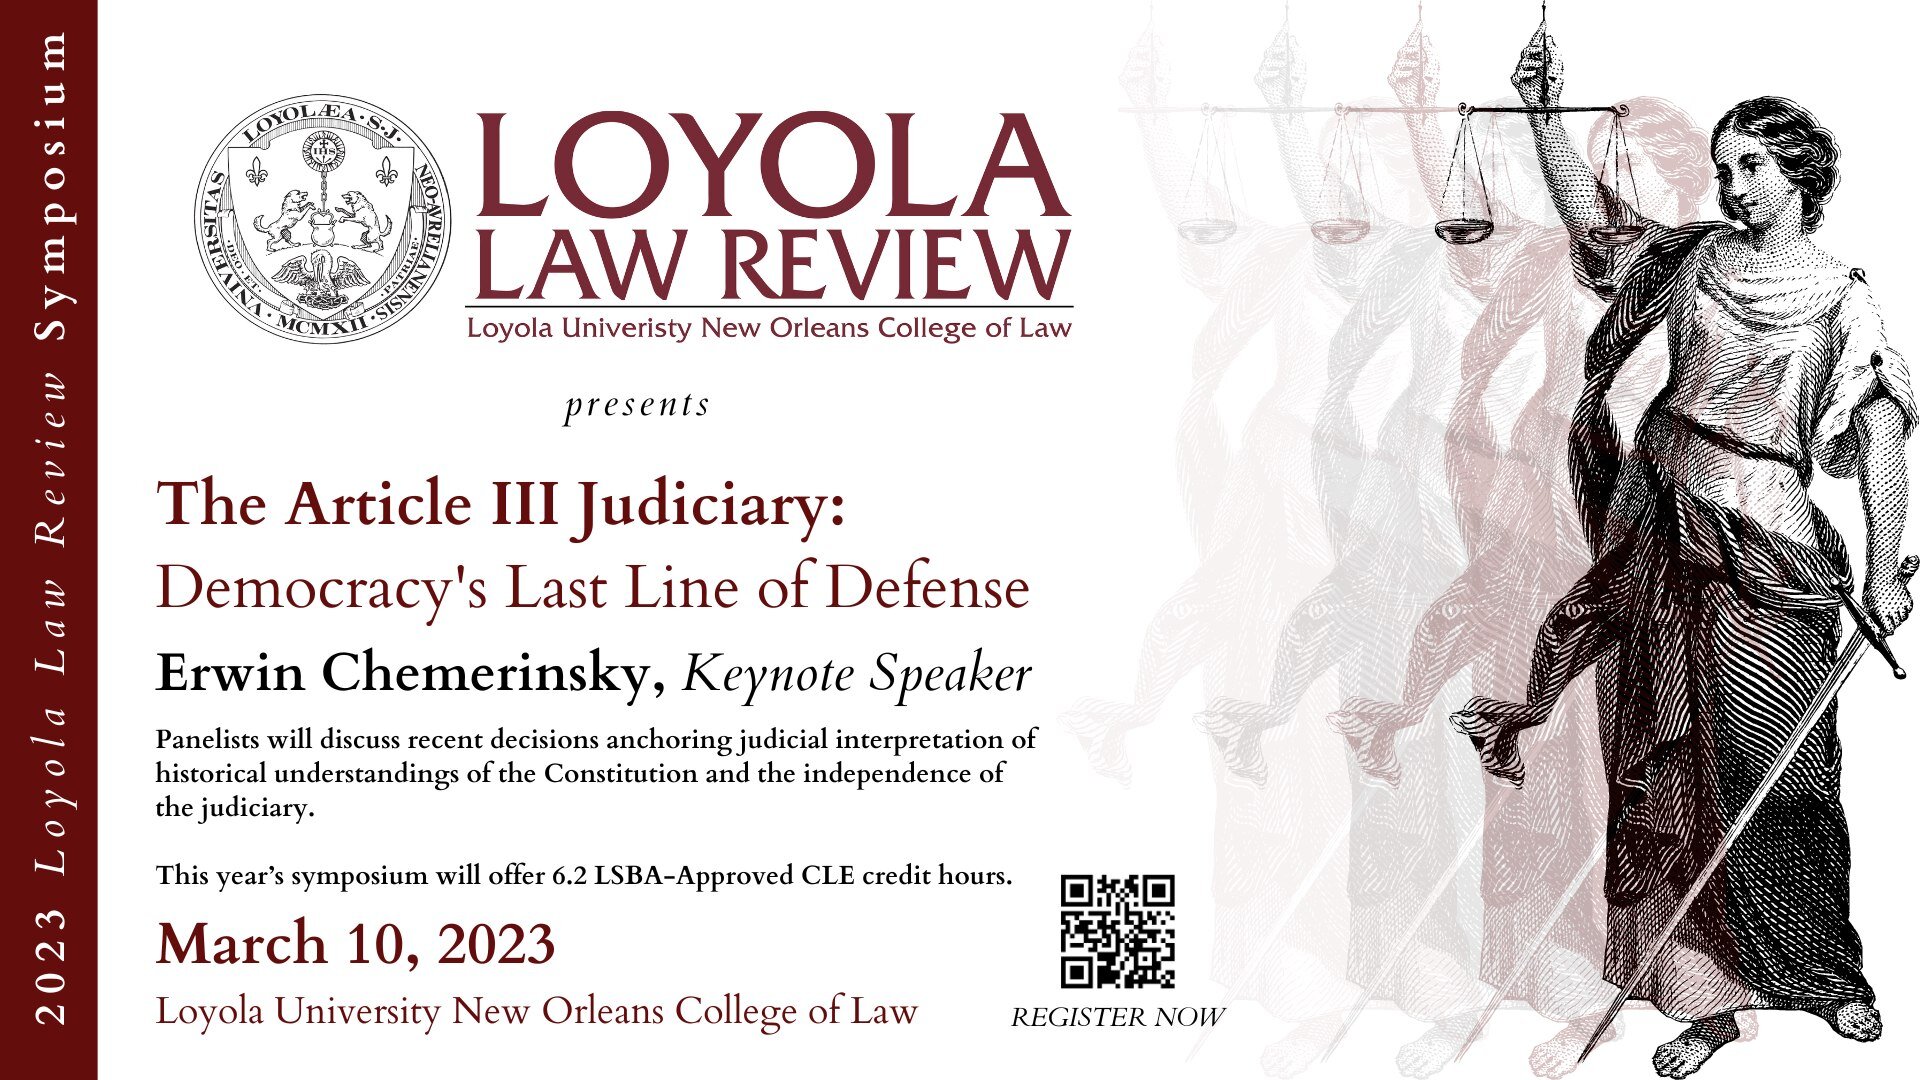 TODAY IS THE DAY!

Join us today at 8:30 am for the 2023 Loyola Law Review Symposium, &quot;The Article III Judiciary: Democracy's Last Line of Defense.&quot; Panels of constitutional law scholars and federal judges will offer unique perspectives on 